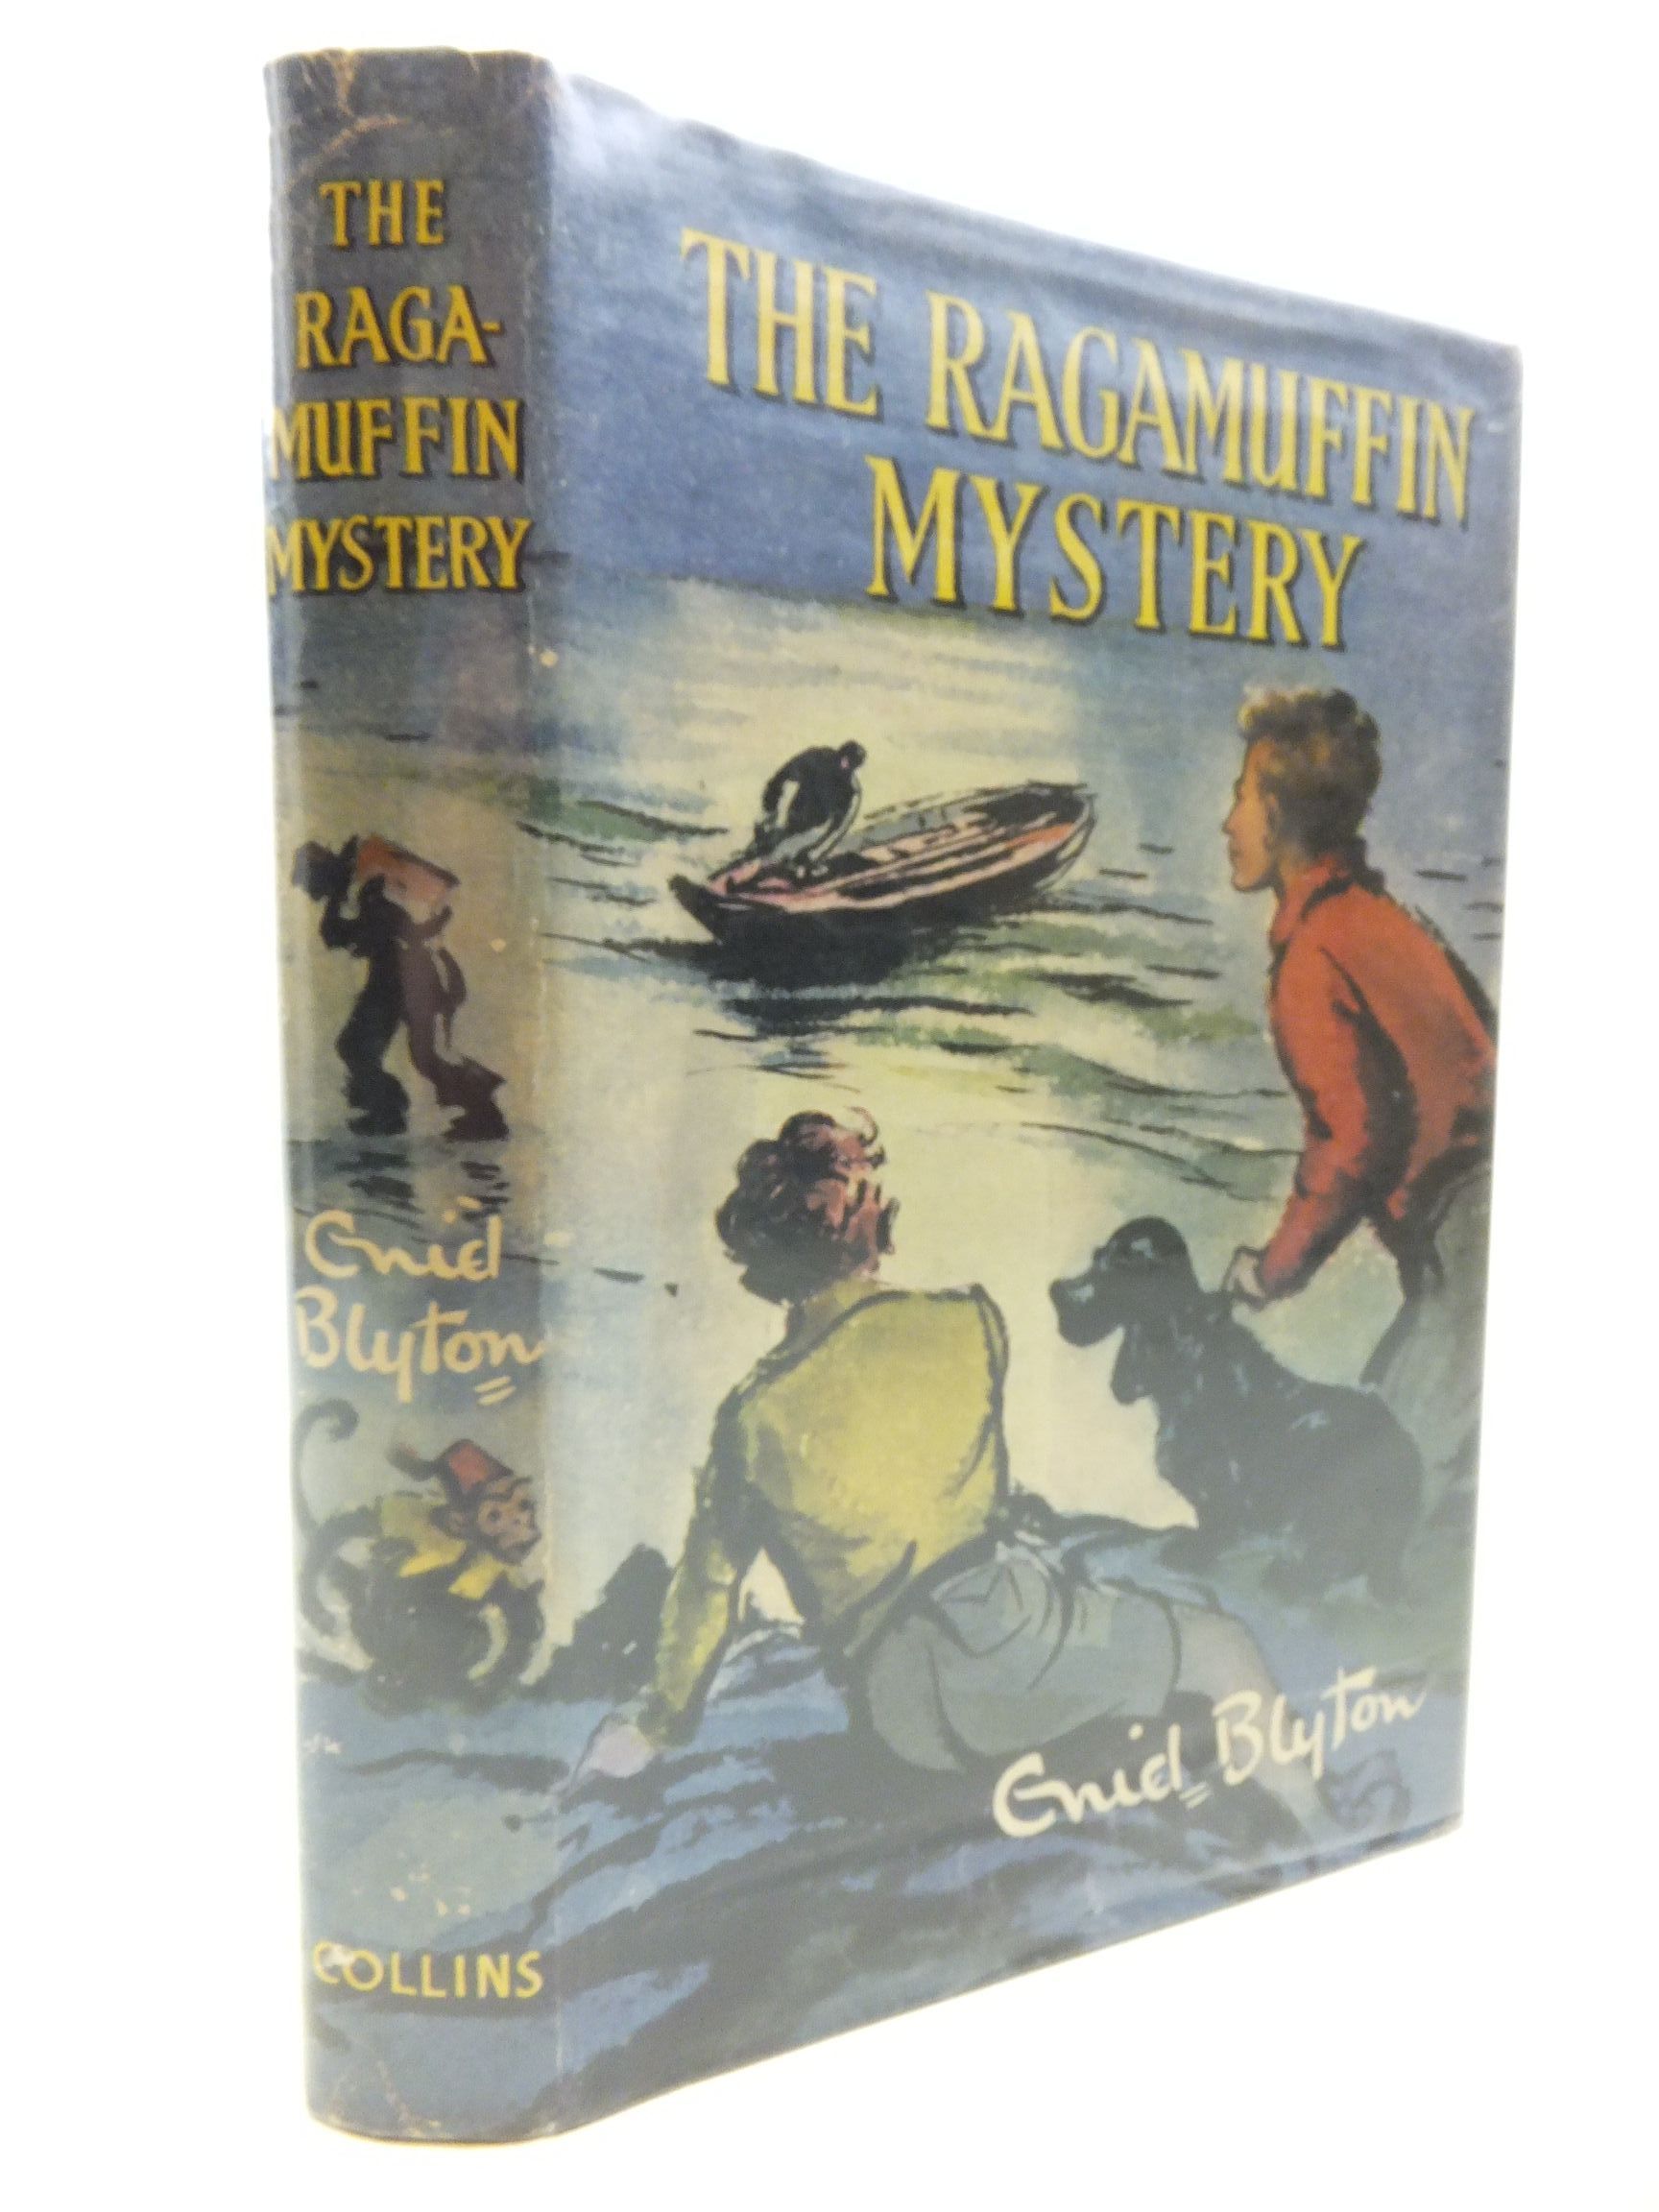 Cover of THE RAGAMUFFIN MYSTERY by Enid Blyton